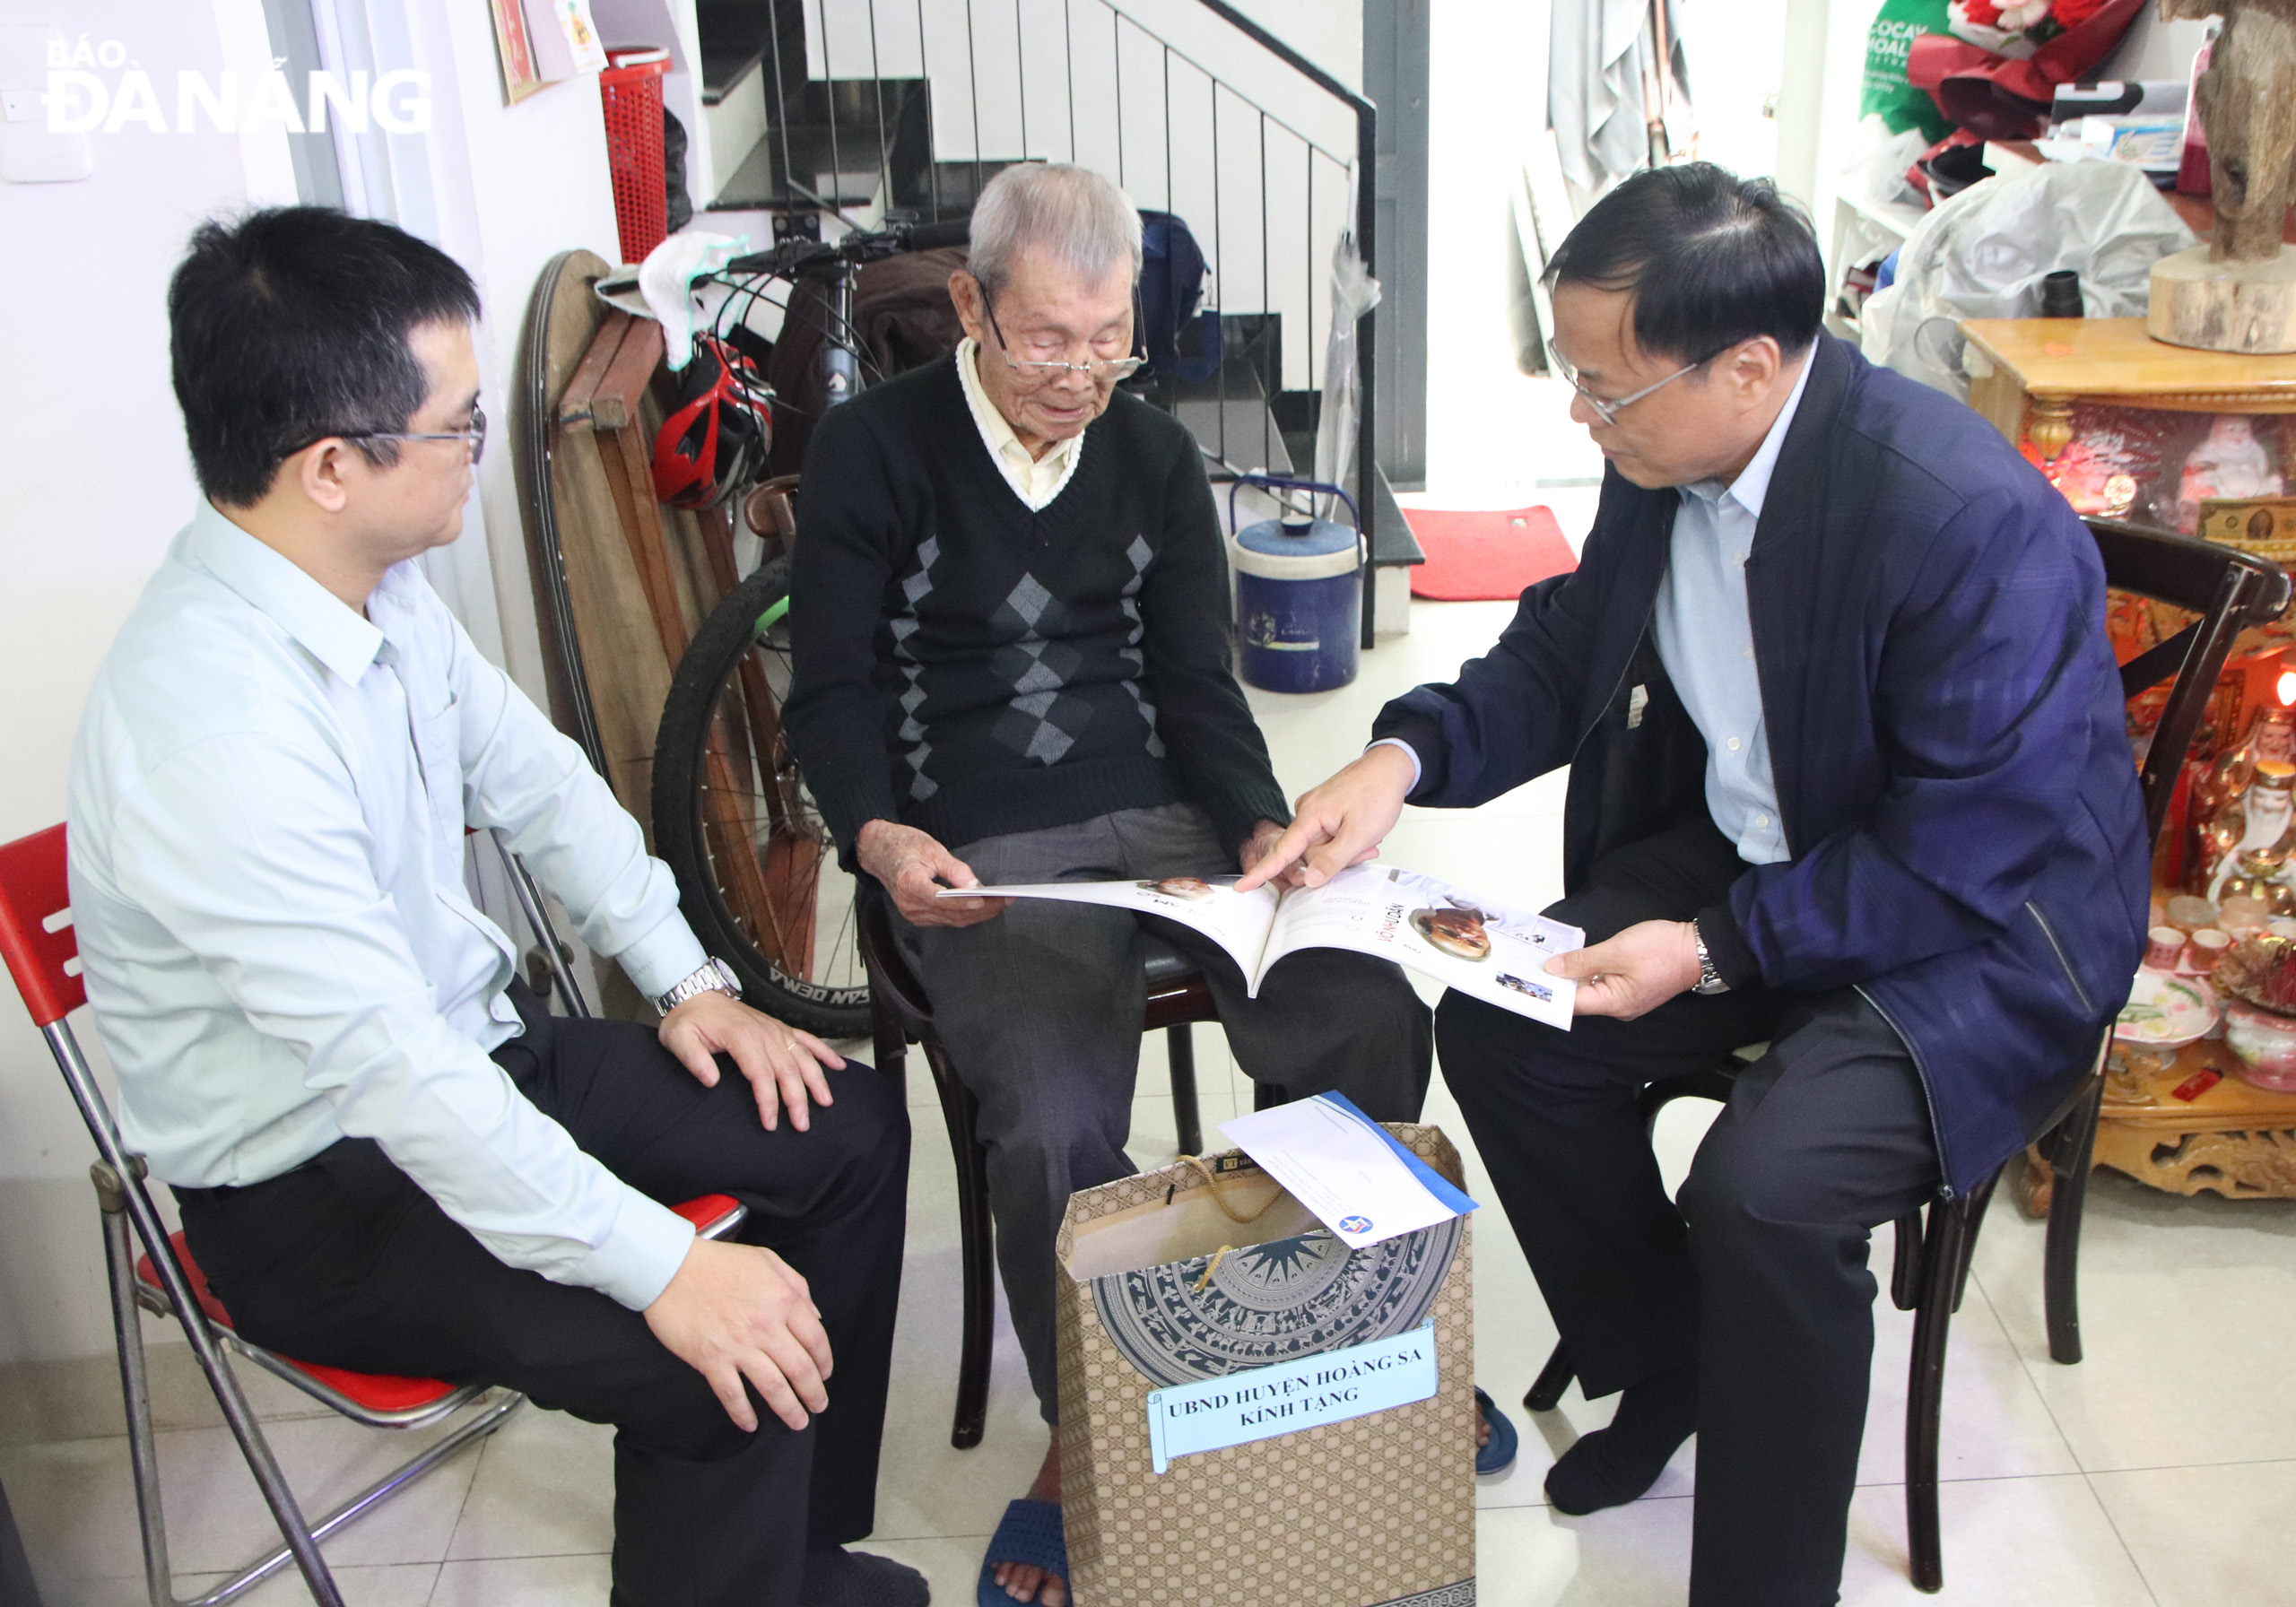 Director of the Department of Home Affairs cum Chairman of Hoang Sa Island District People's Committee Vo Ngoc Dong (right) giving a gift to Mr. Pham So (middle). Photo: TRONG HUY